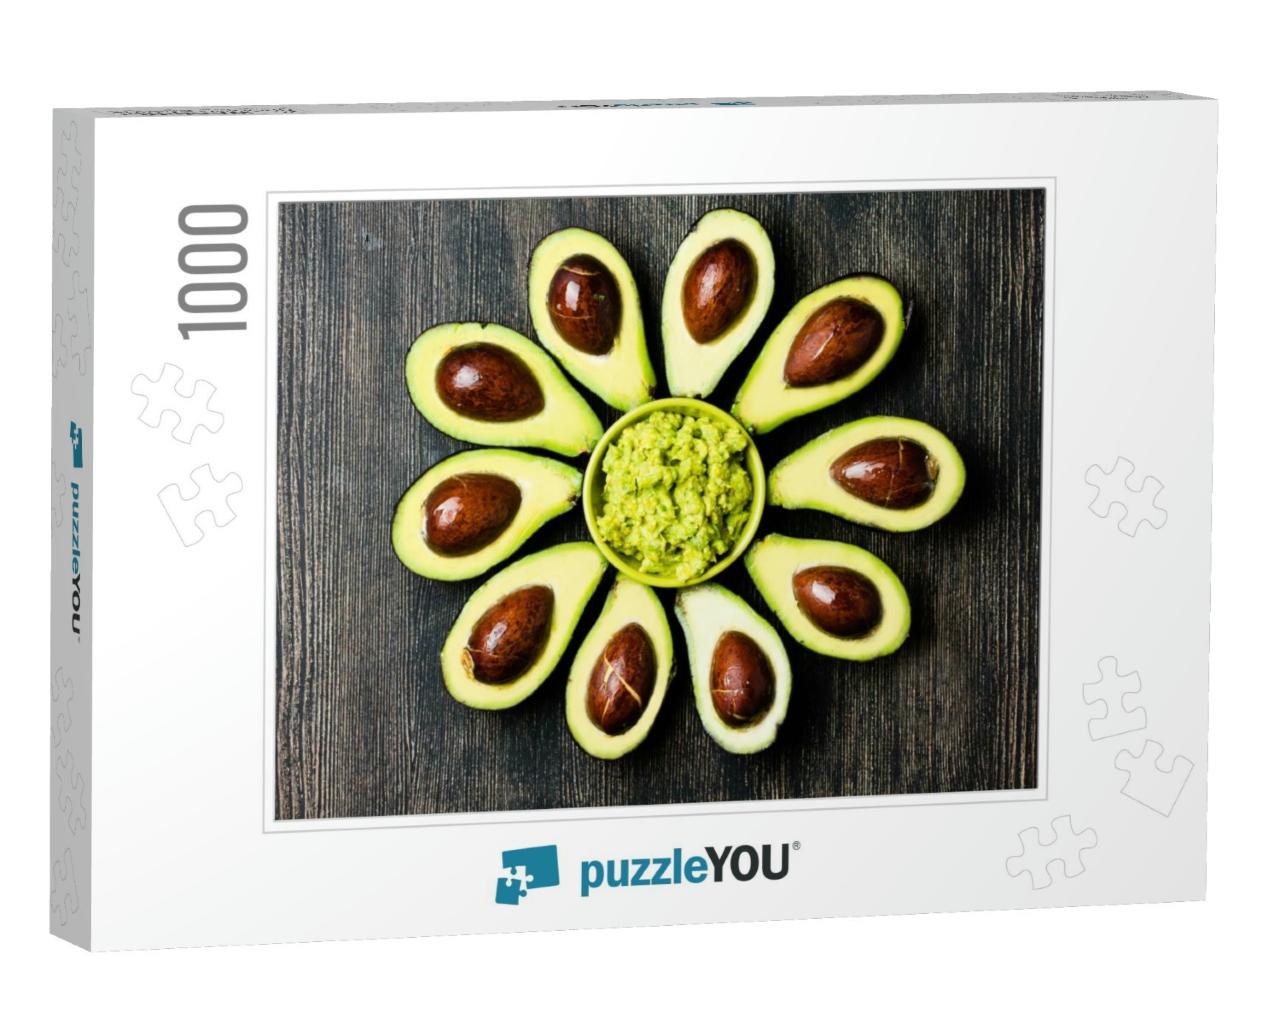 Avocado. Flower Made from Avocado Palta & Guacamole Bowl... Jigsaw Puzzle with 1000 pieces